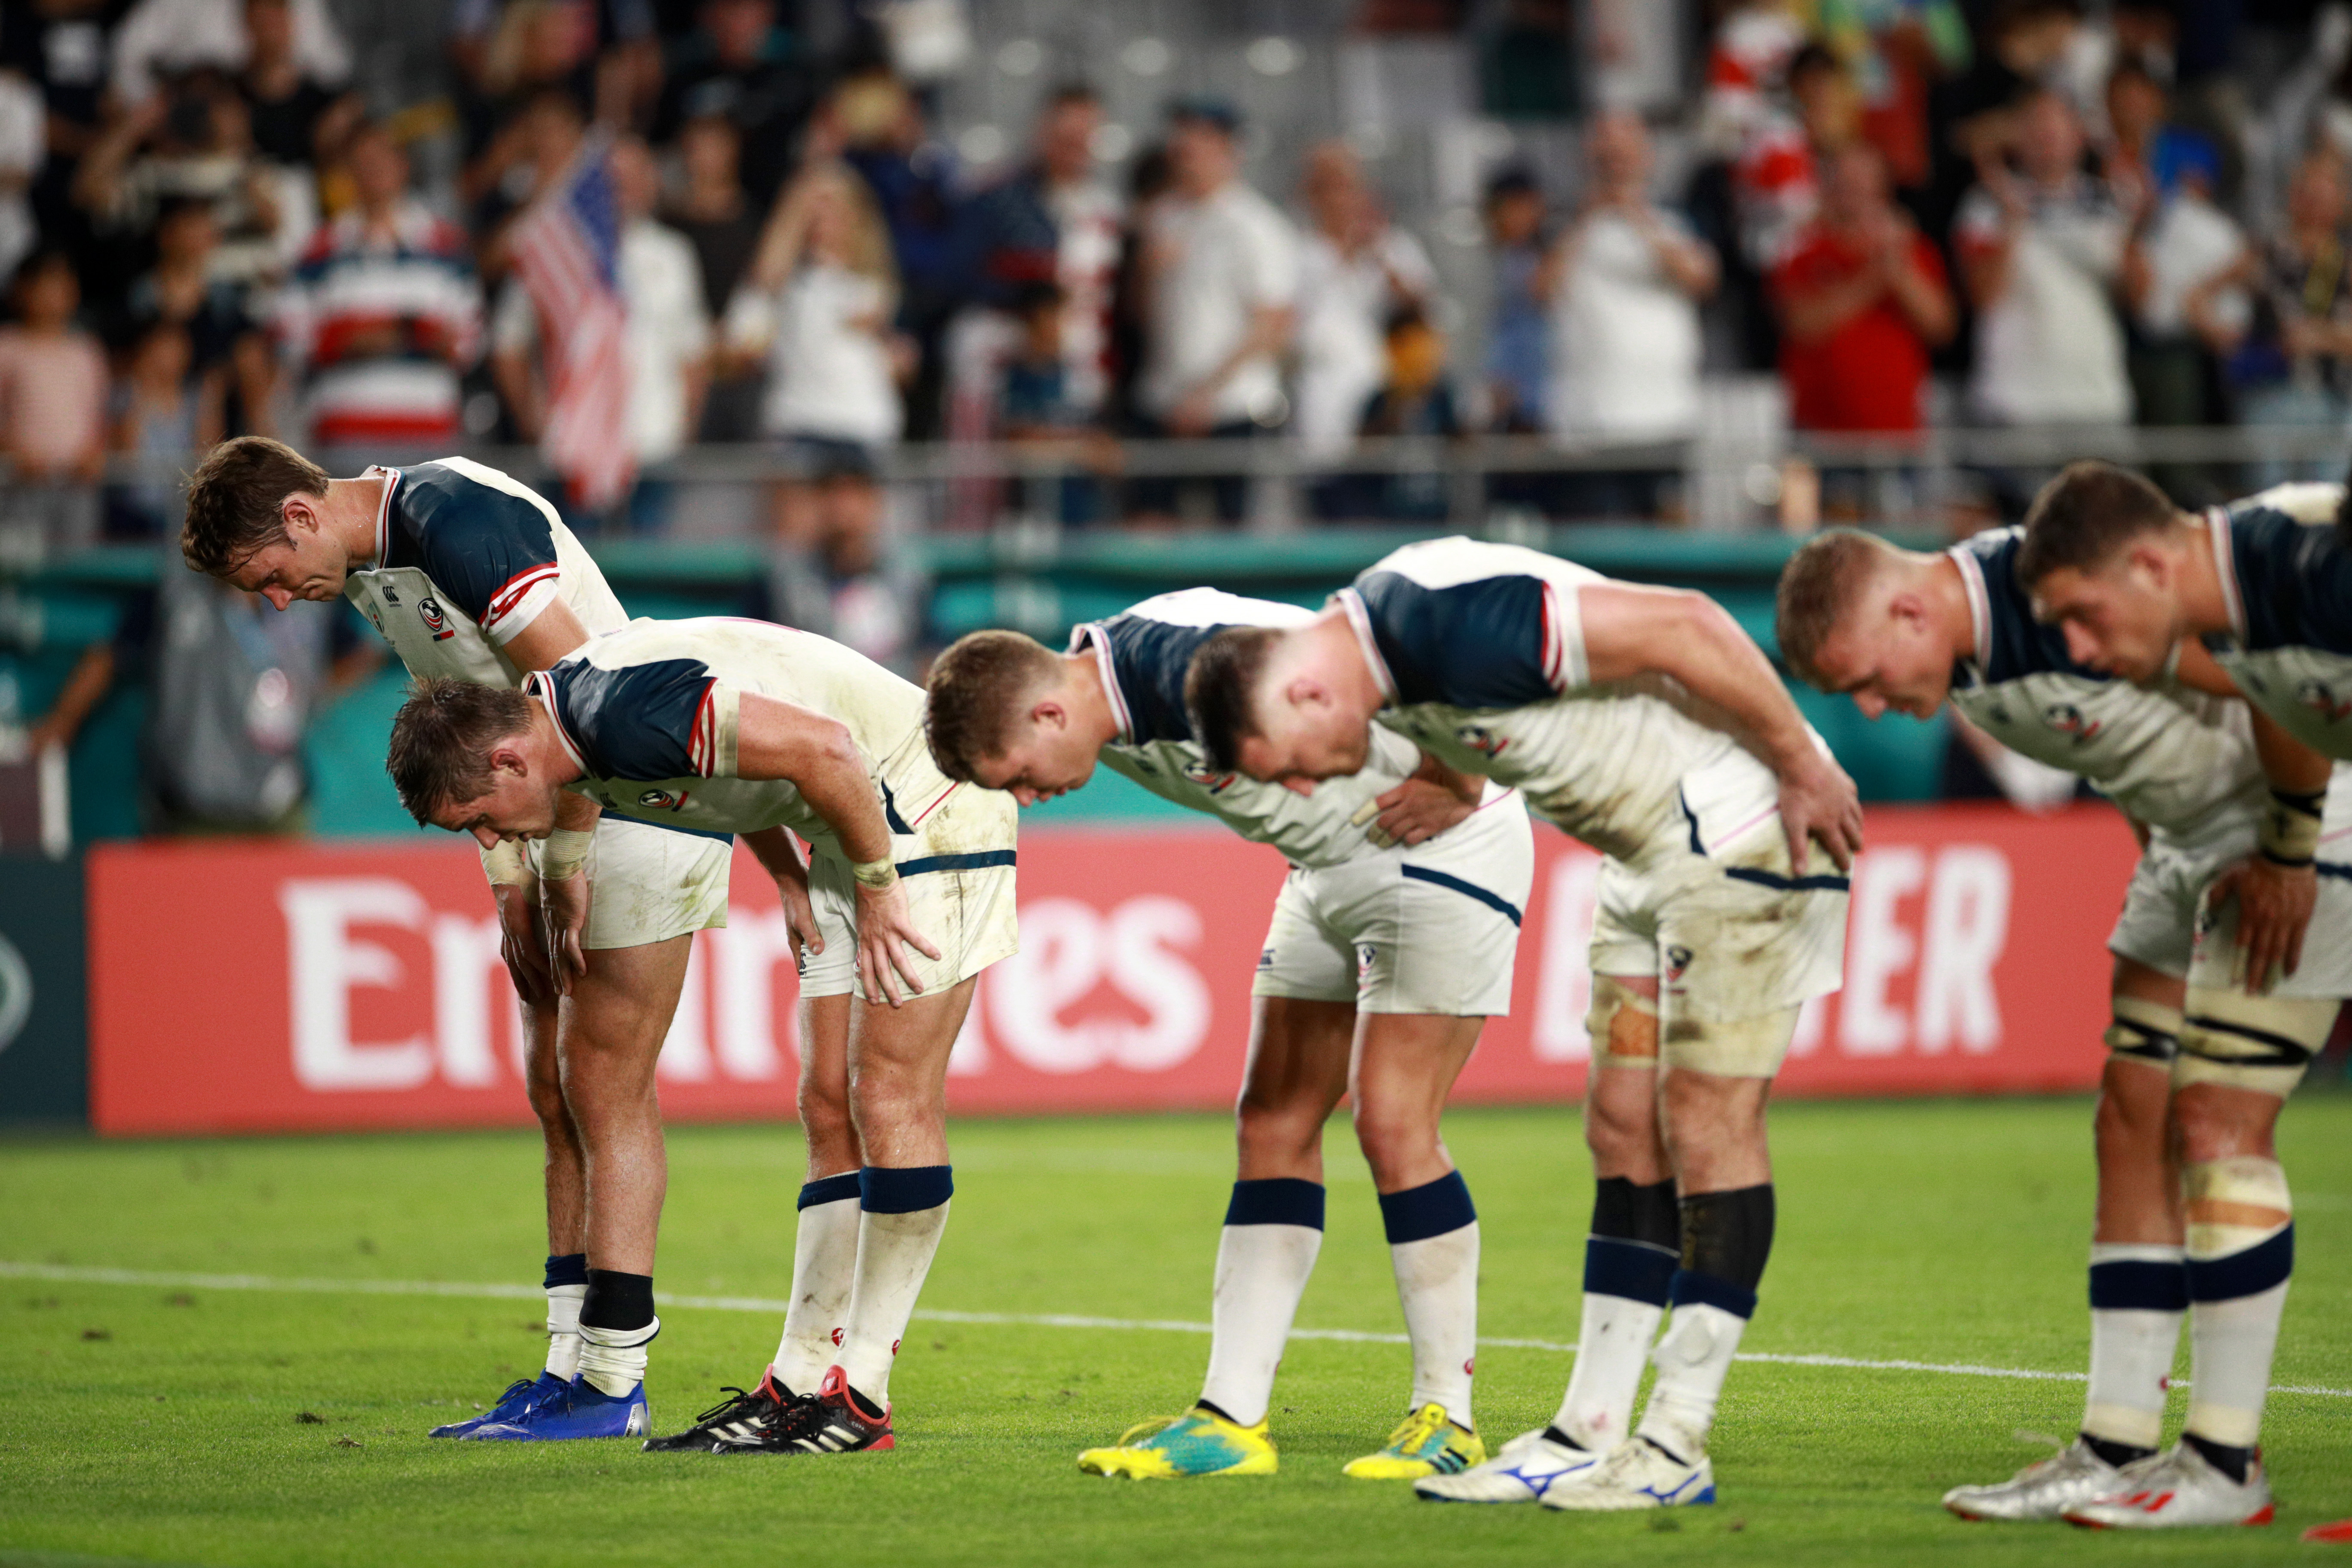 Rugby World Cup 2019. Rugby in USA. England - USA 0-0. Rugby cup